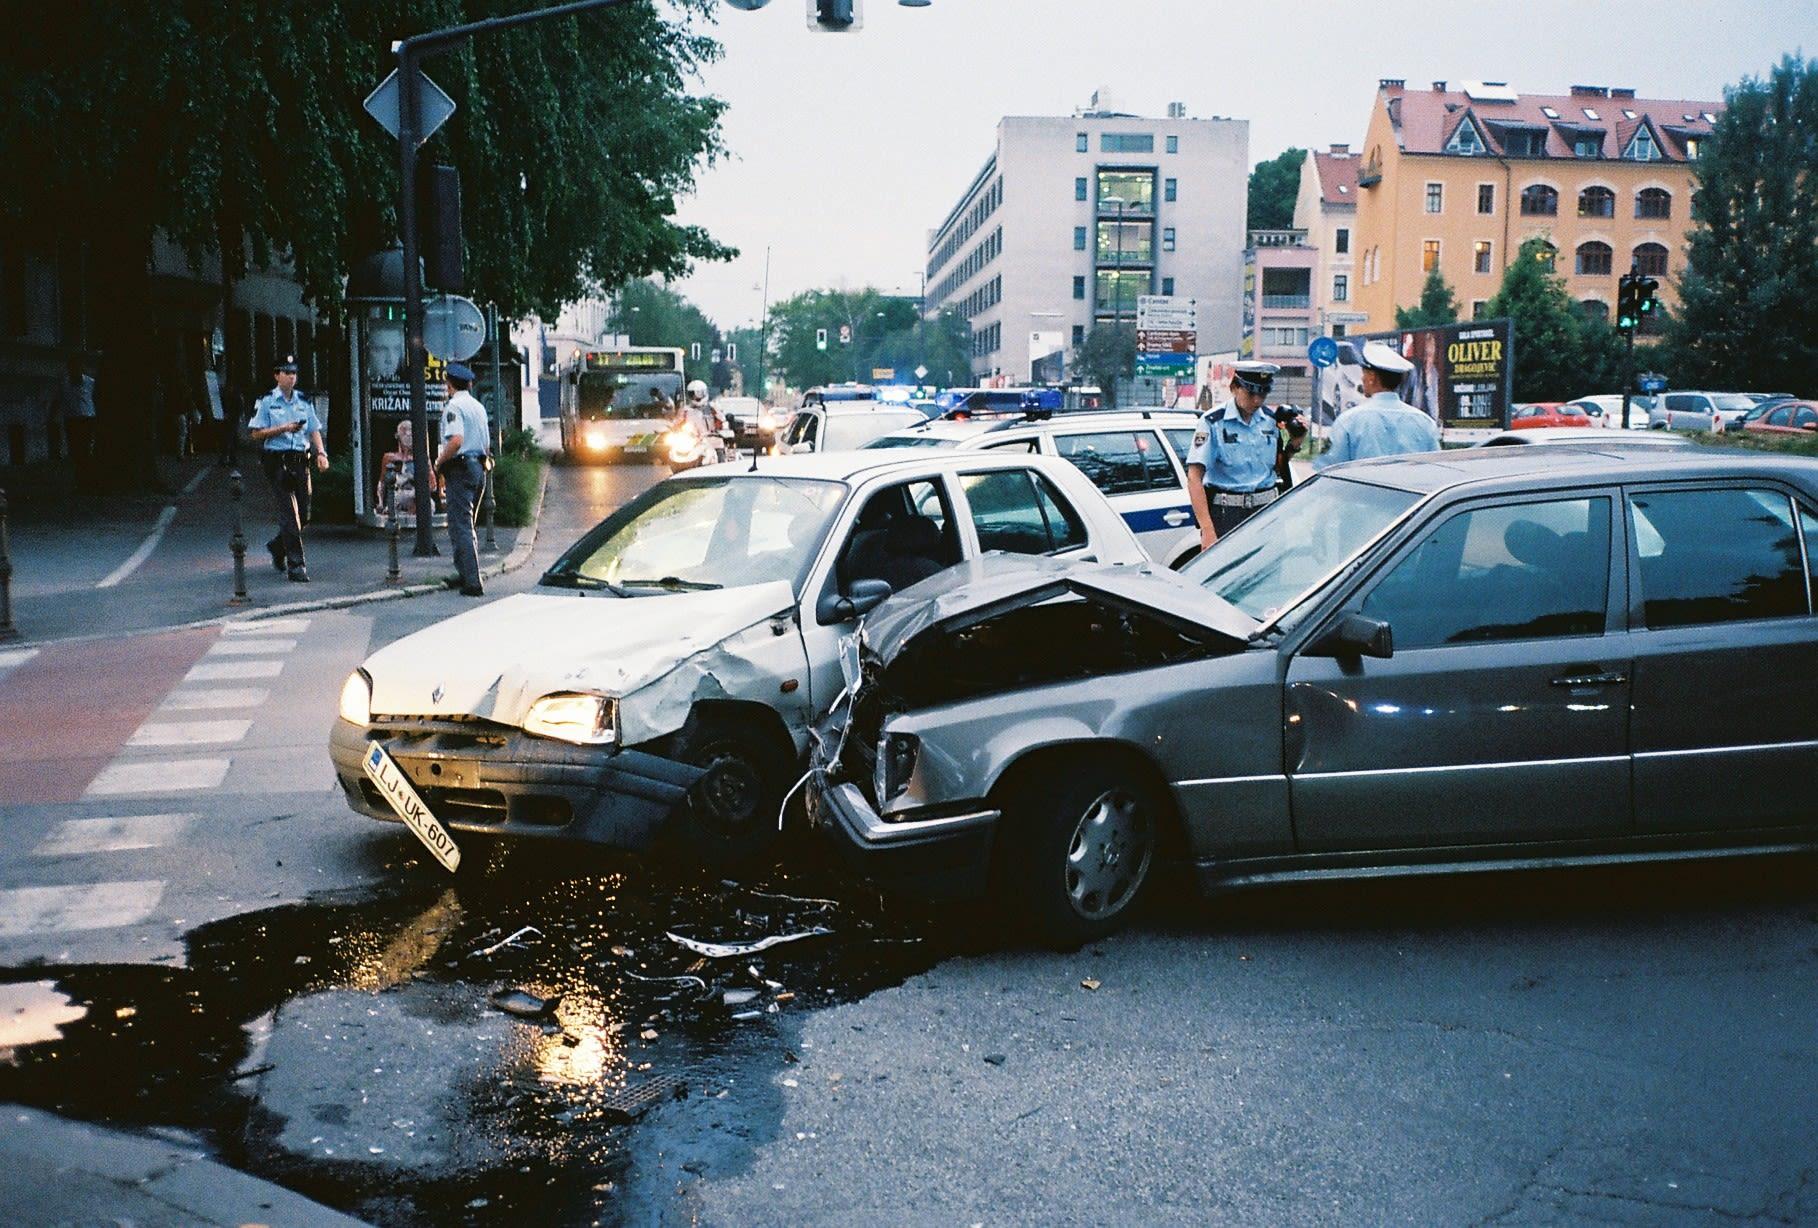 Personal Injury Claims from a Car Accident